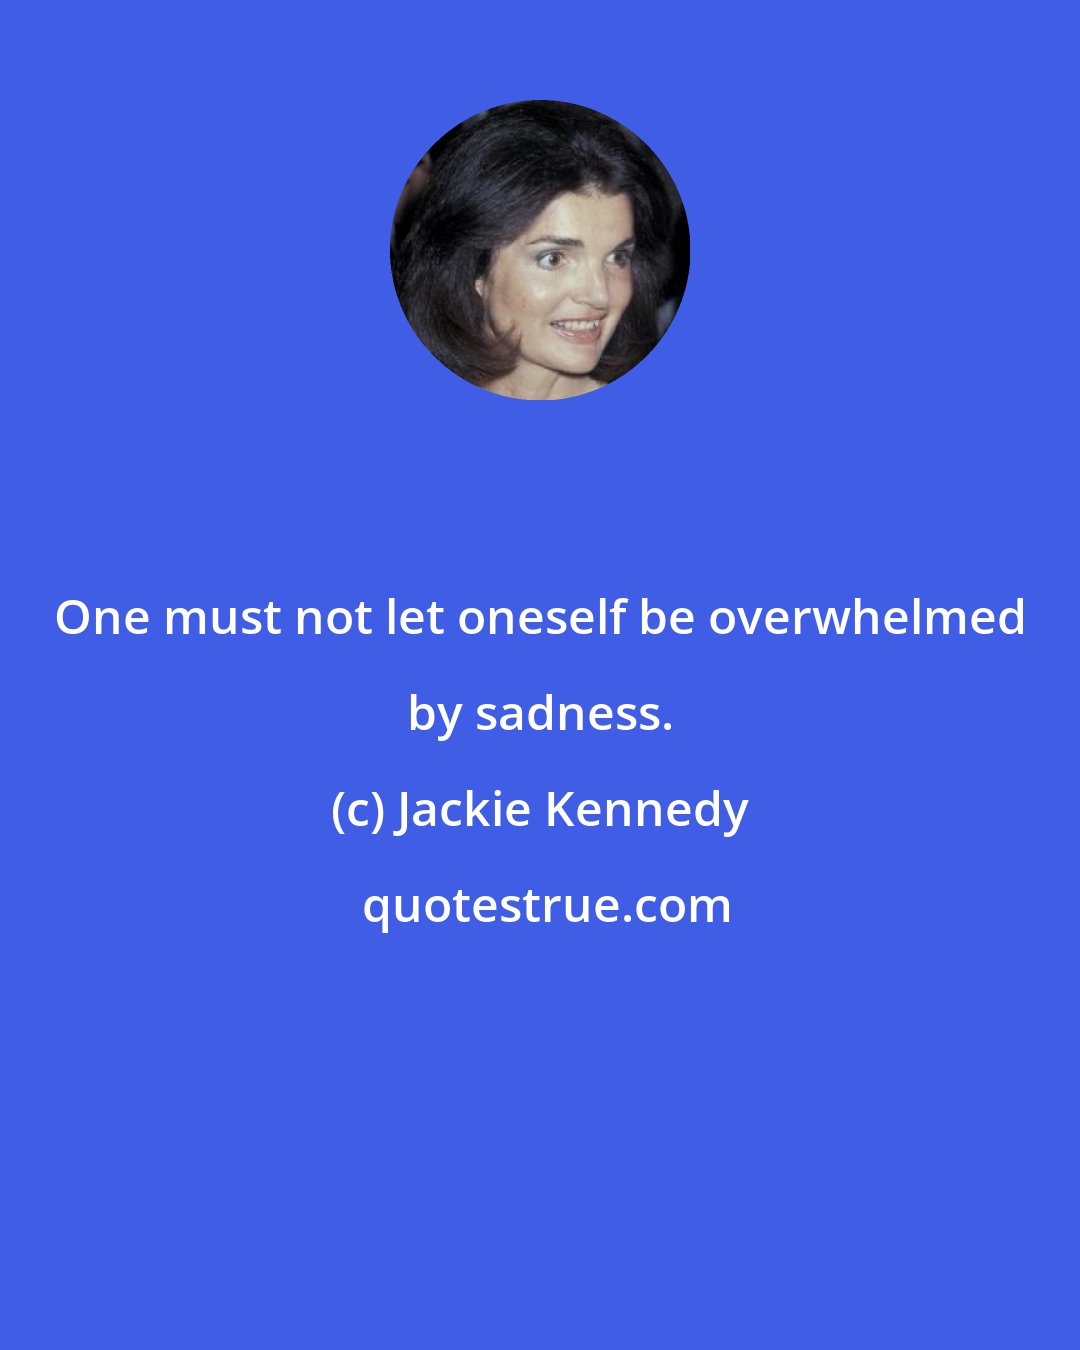 Jackie Kennedy: One must not let oneself be overwhelmed by sadness.